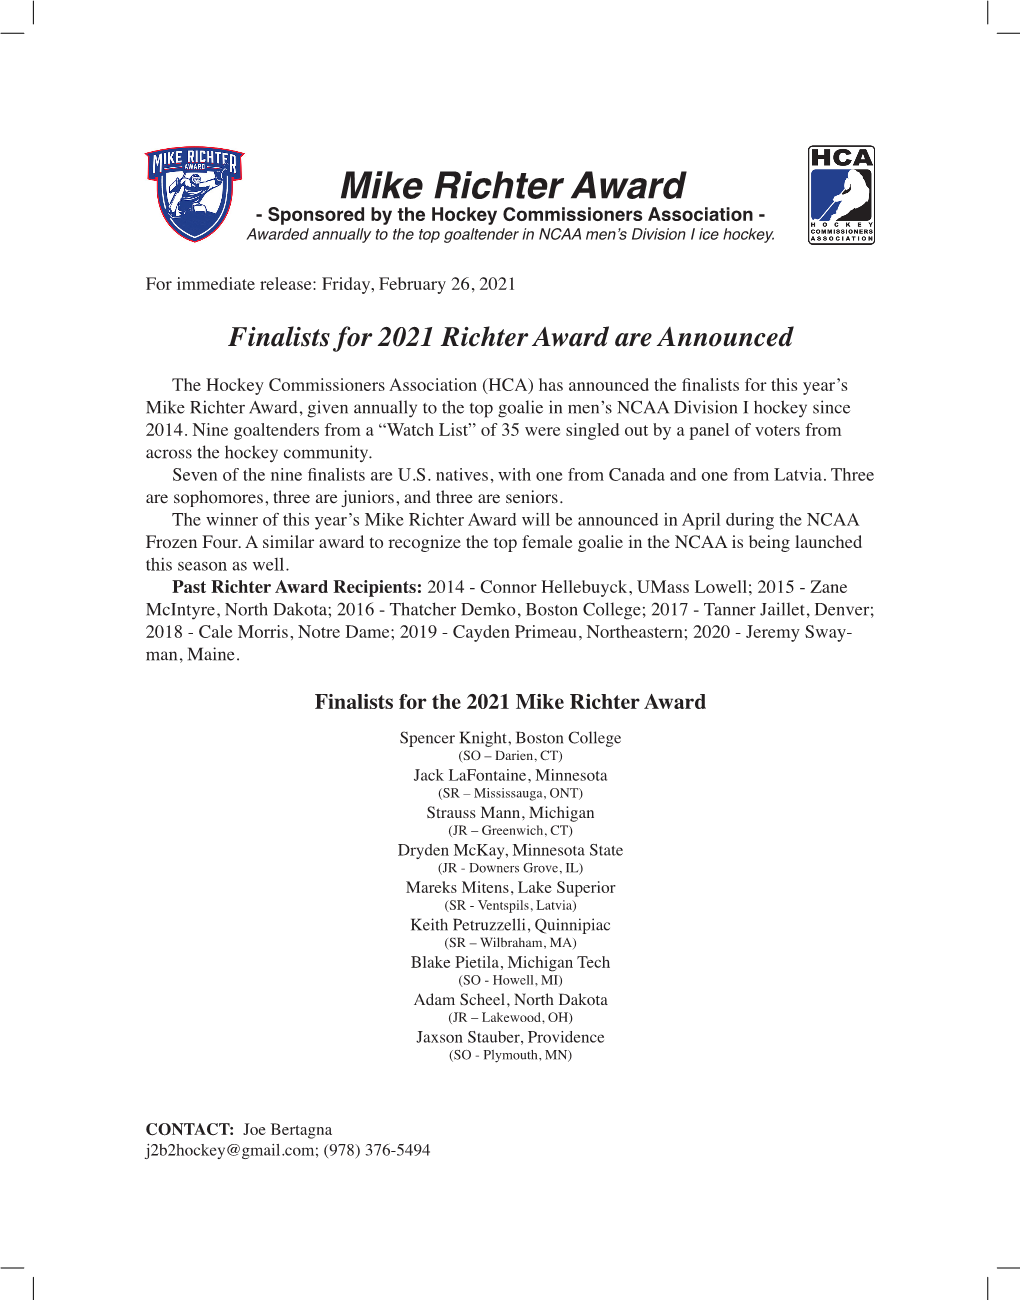 Mike Richter Award - Sponsored by the Hockey Commissioners Association - Awarded Annually to the Top Goaltender in NCAA Men’S Division I Ice Hockey